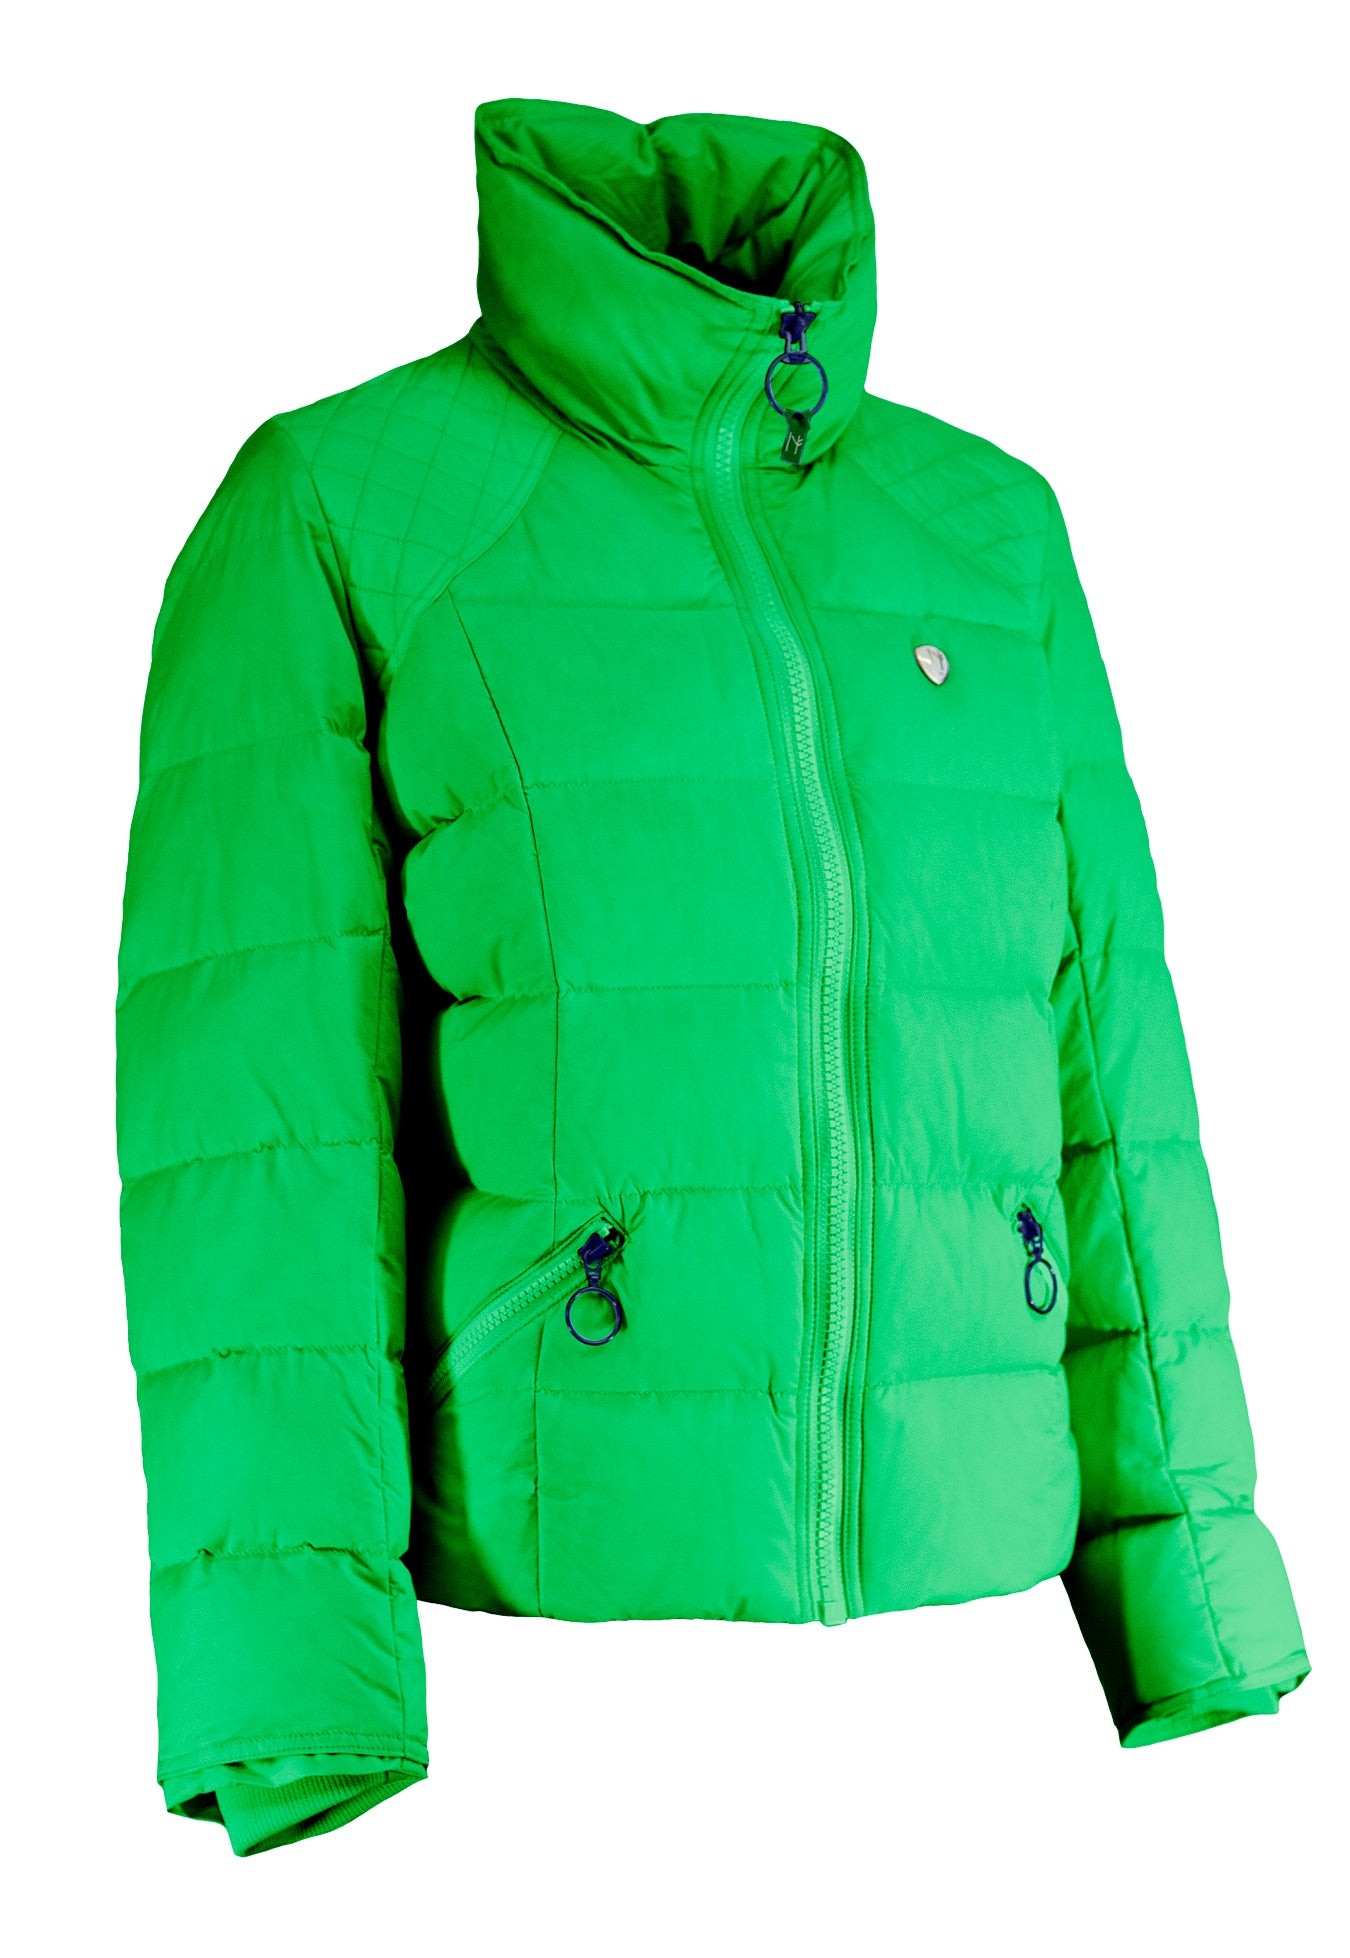 The Dasher Jacket